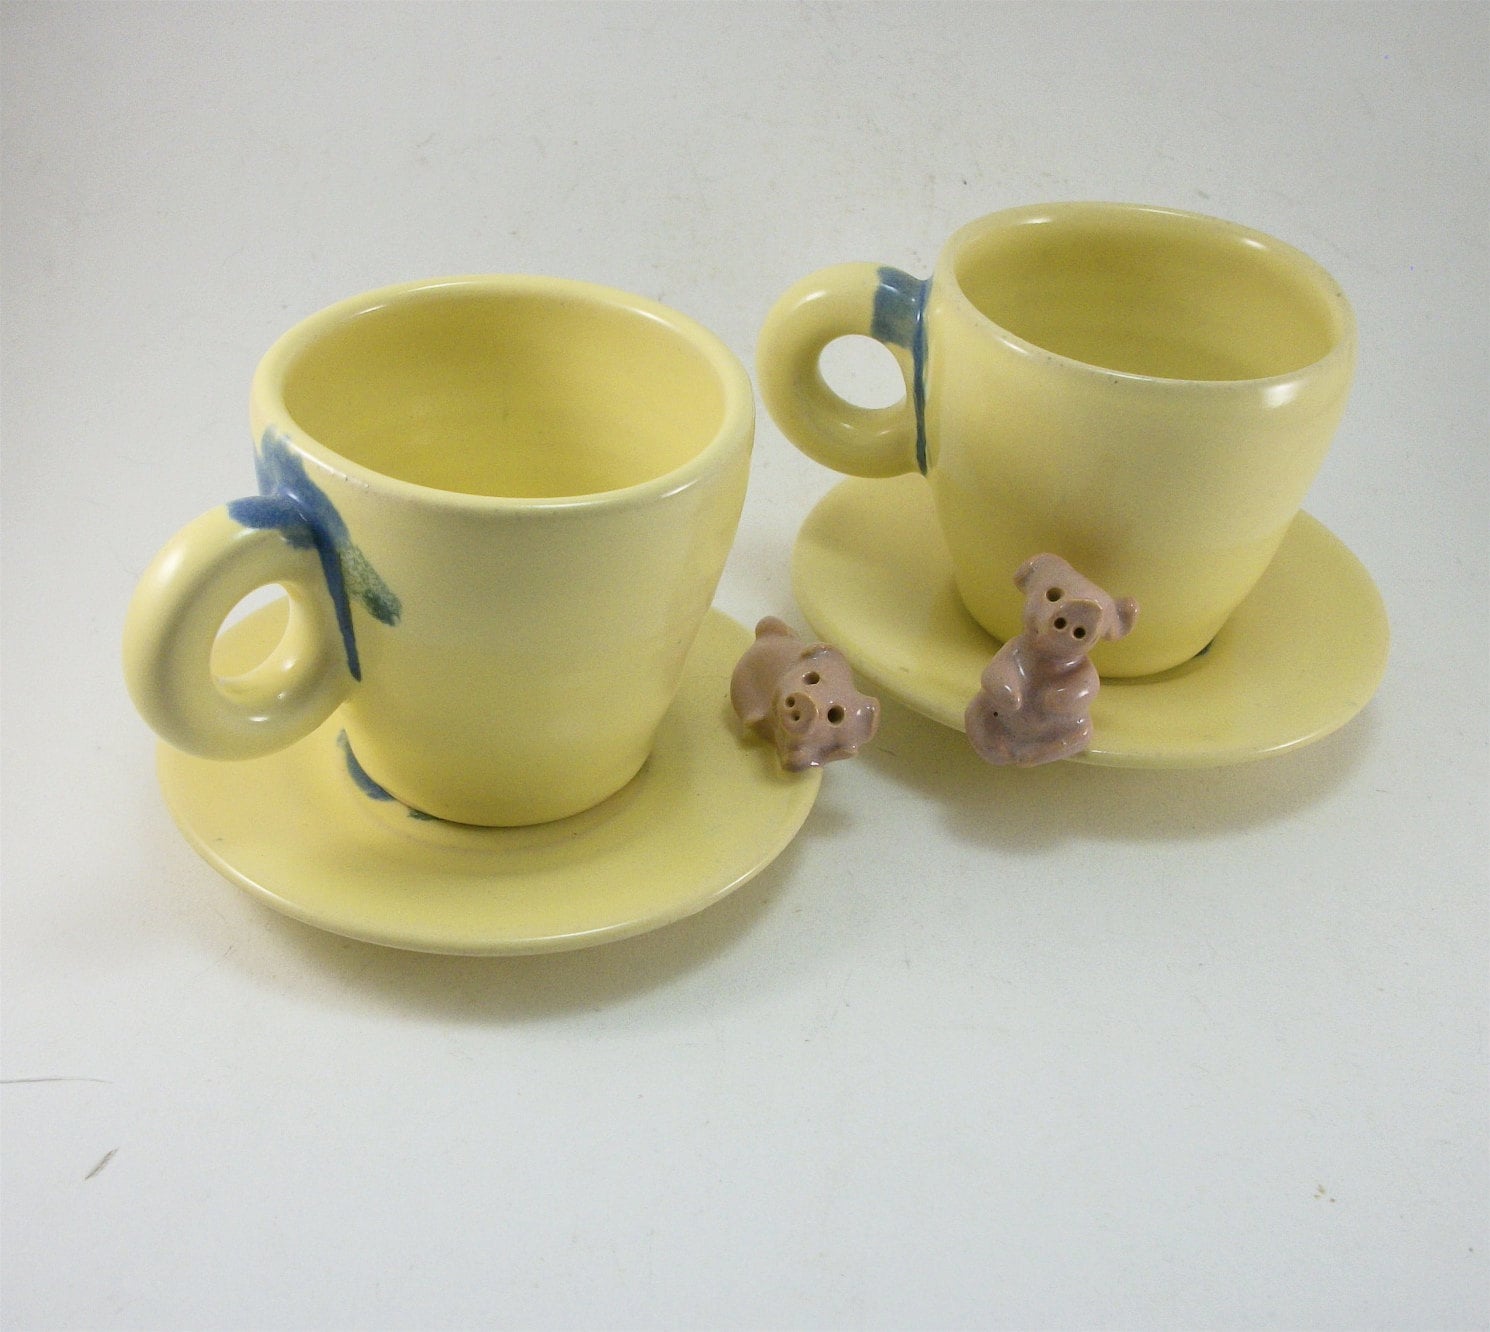 pair of pig cups and saucers with pigs for kids or espresso